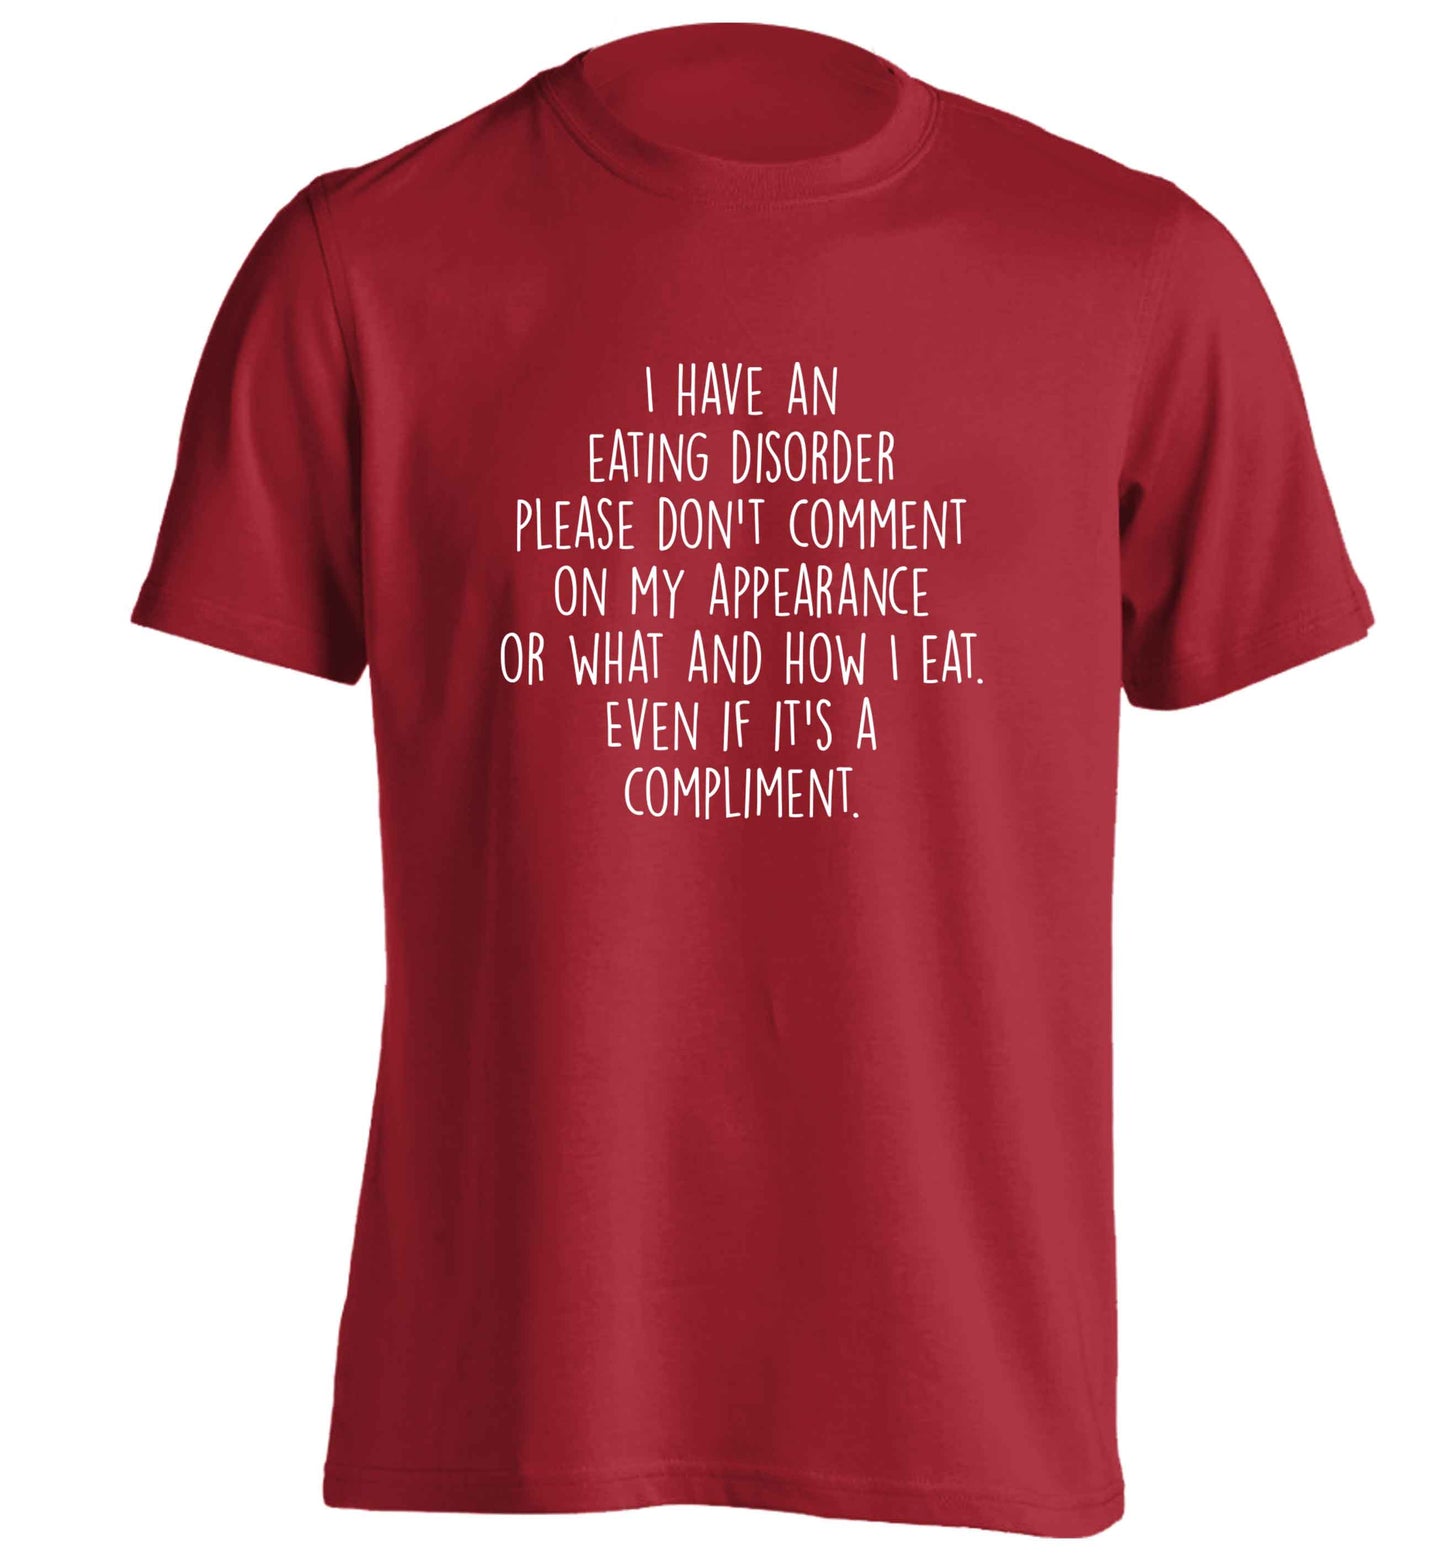 I have an eating disorder please don't comment on my appearance or what and how I eat. Even if it's a compliment adults unisex red Tshirt 2XL